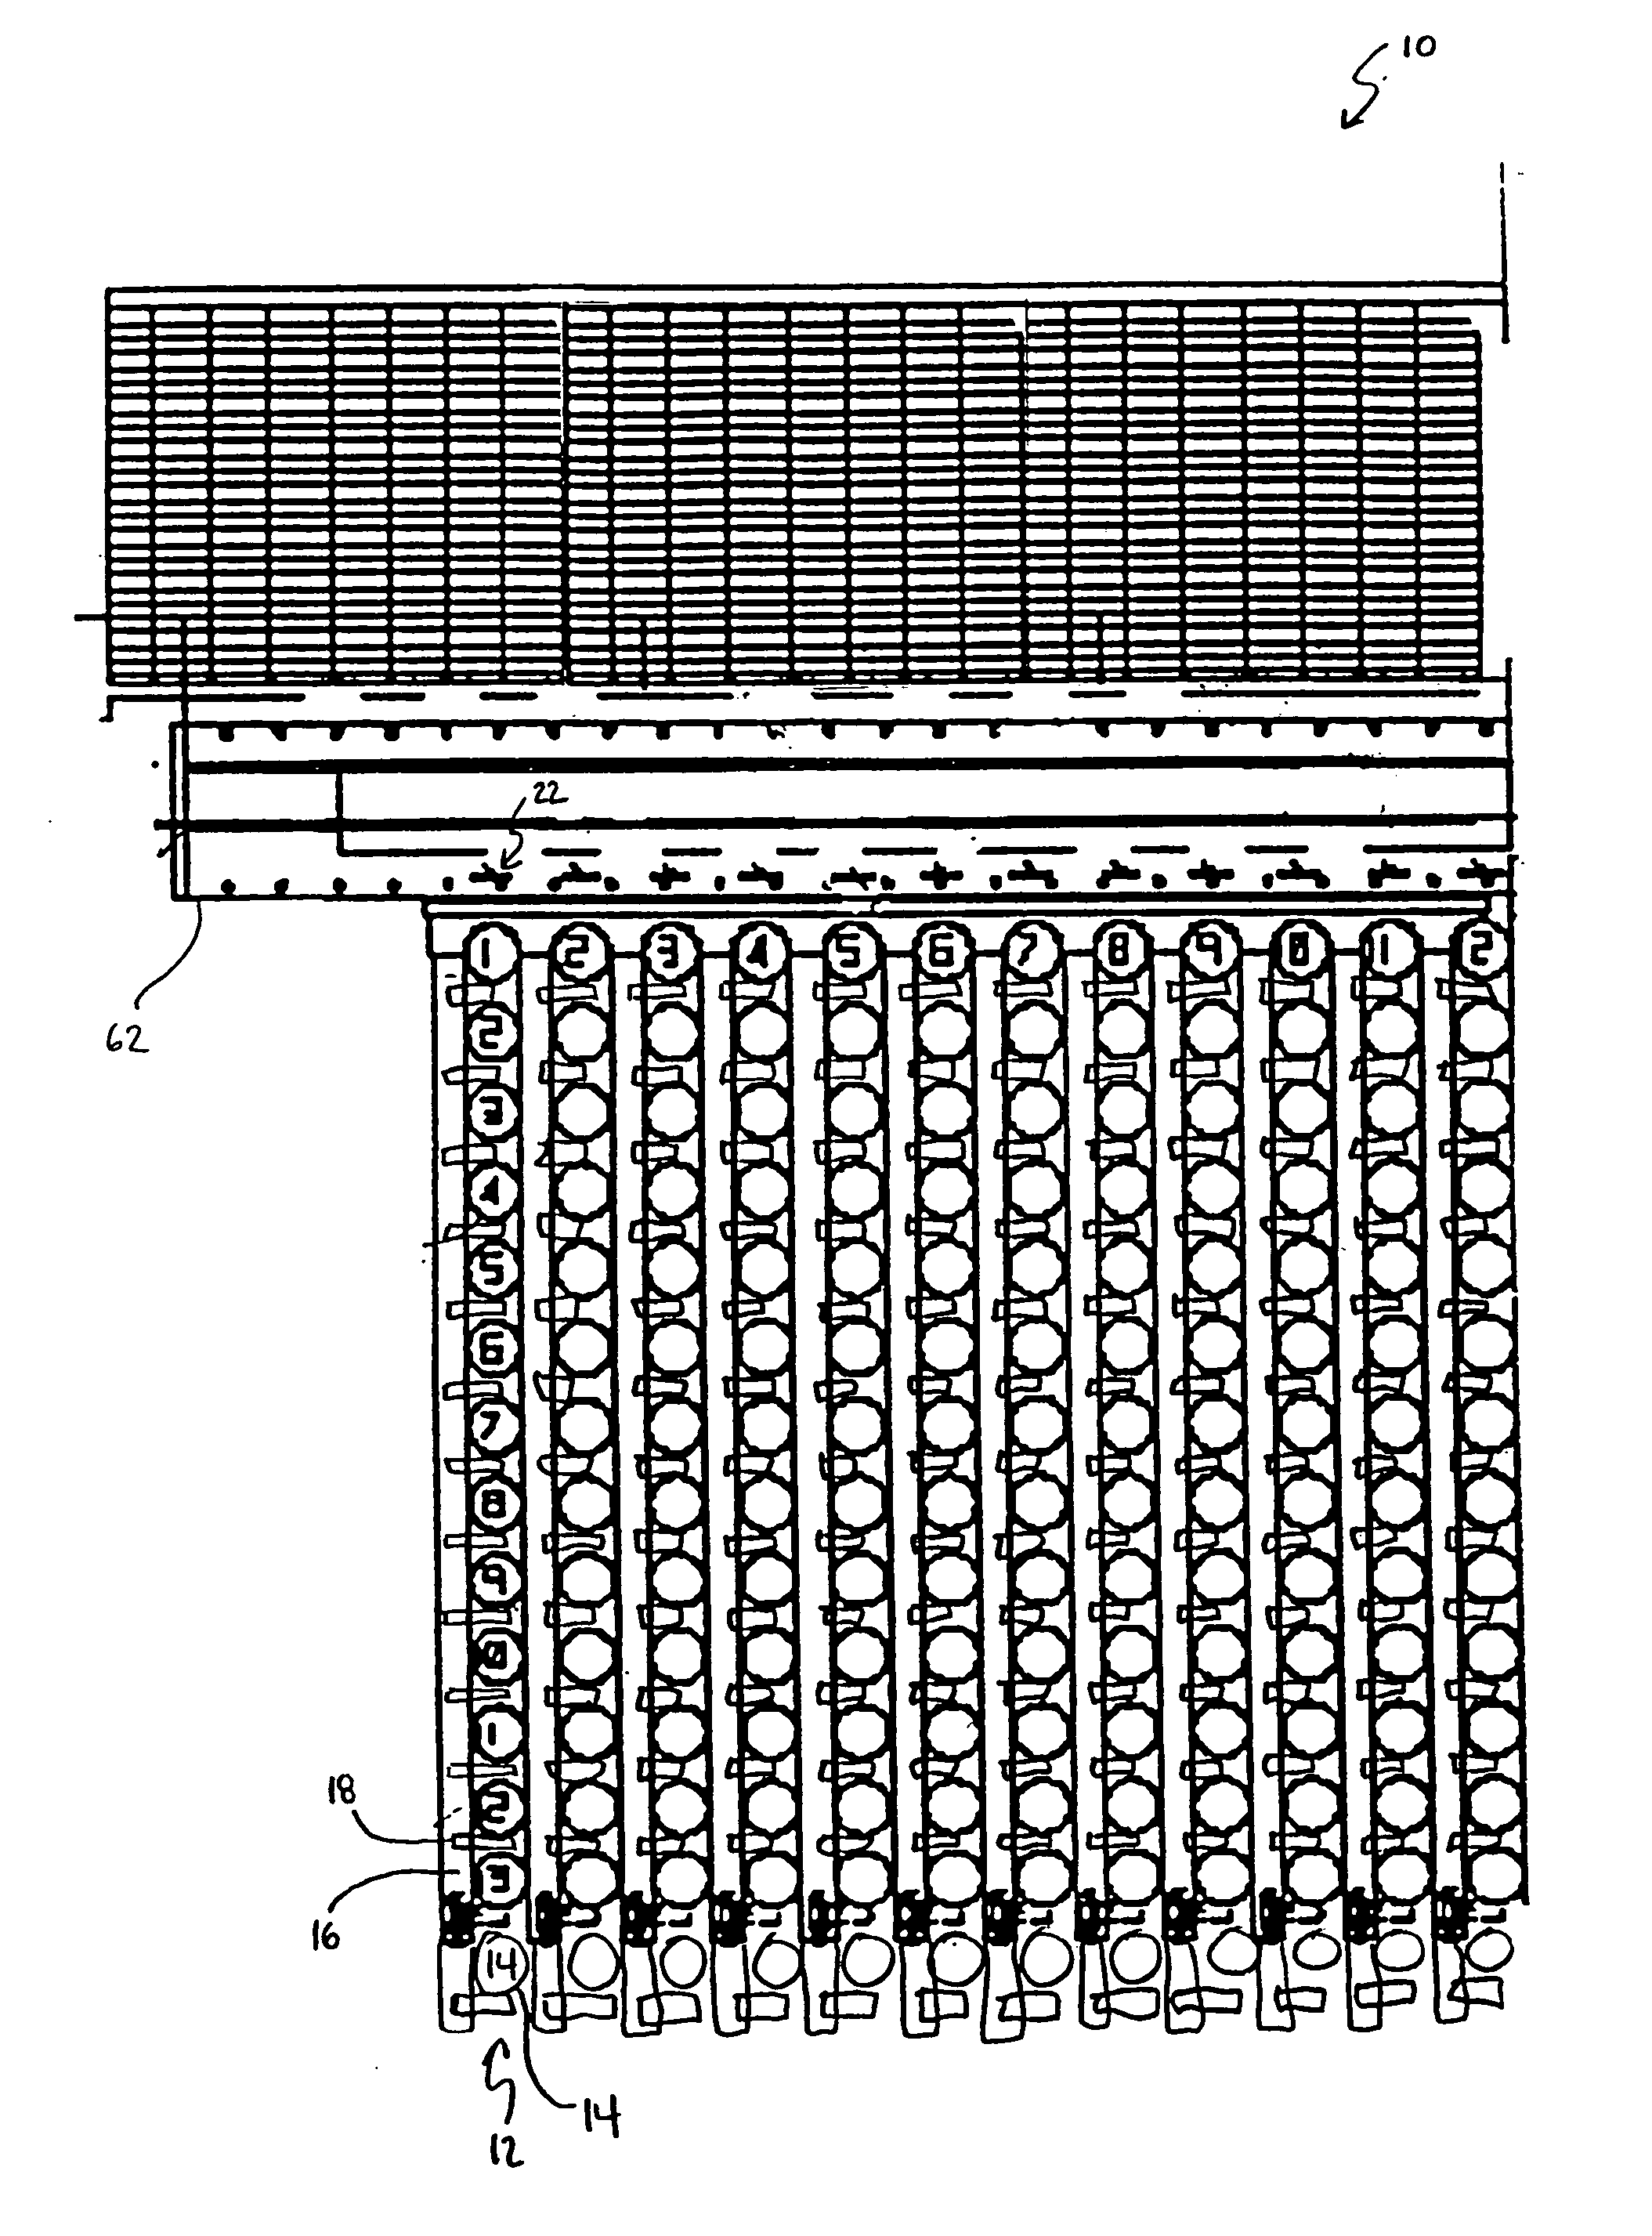 Fingerboard with pneumatically actuated finger latches